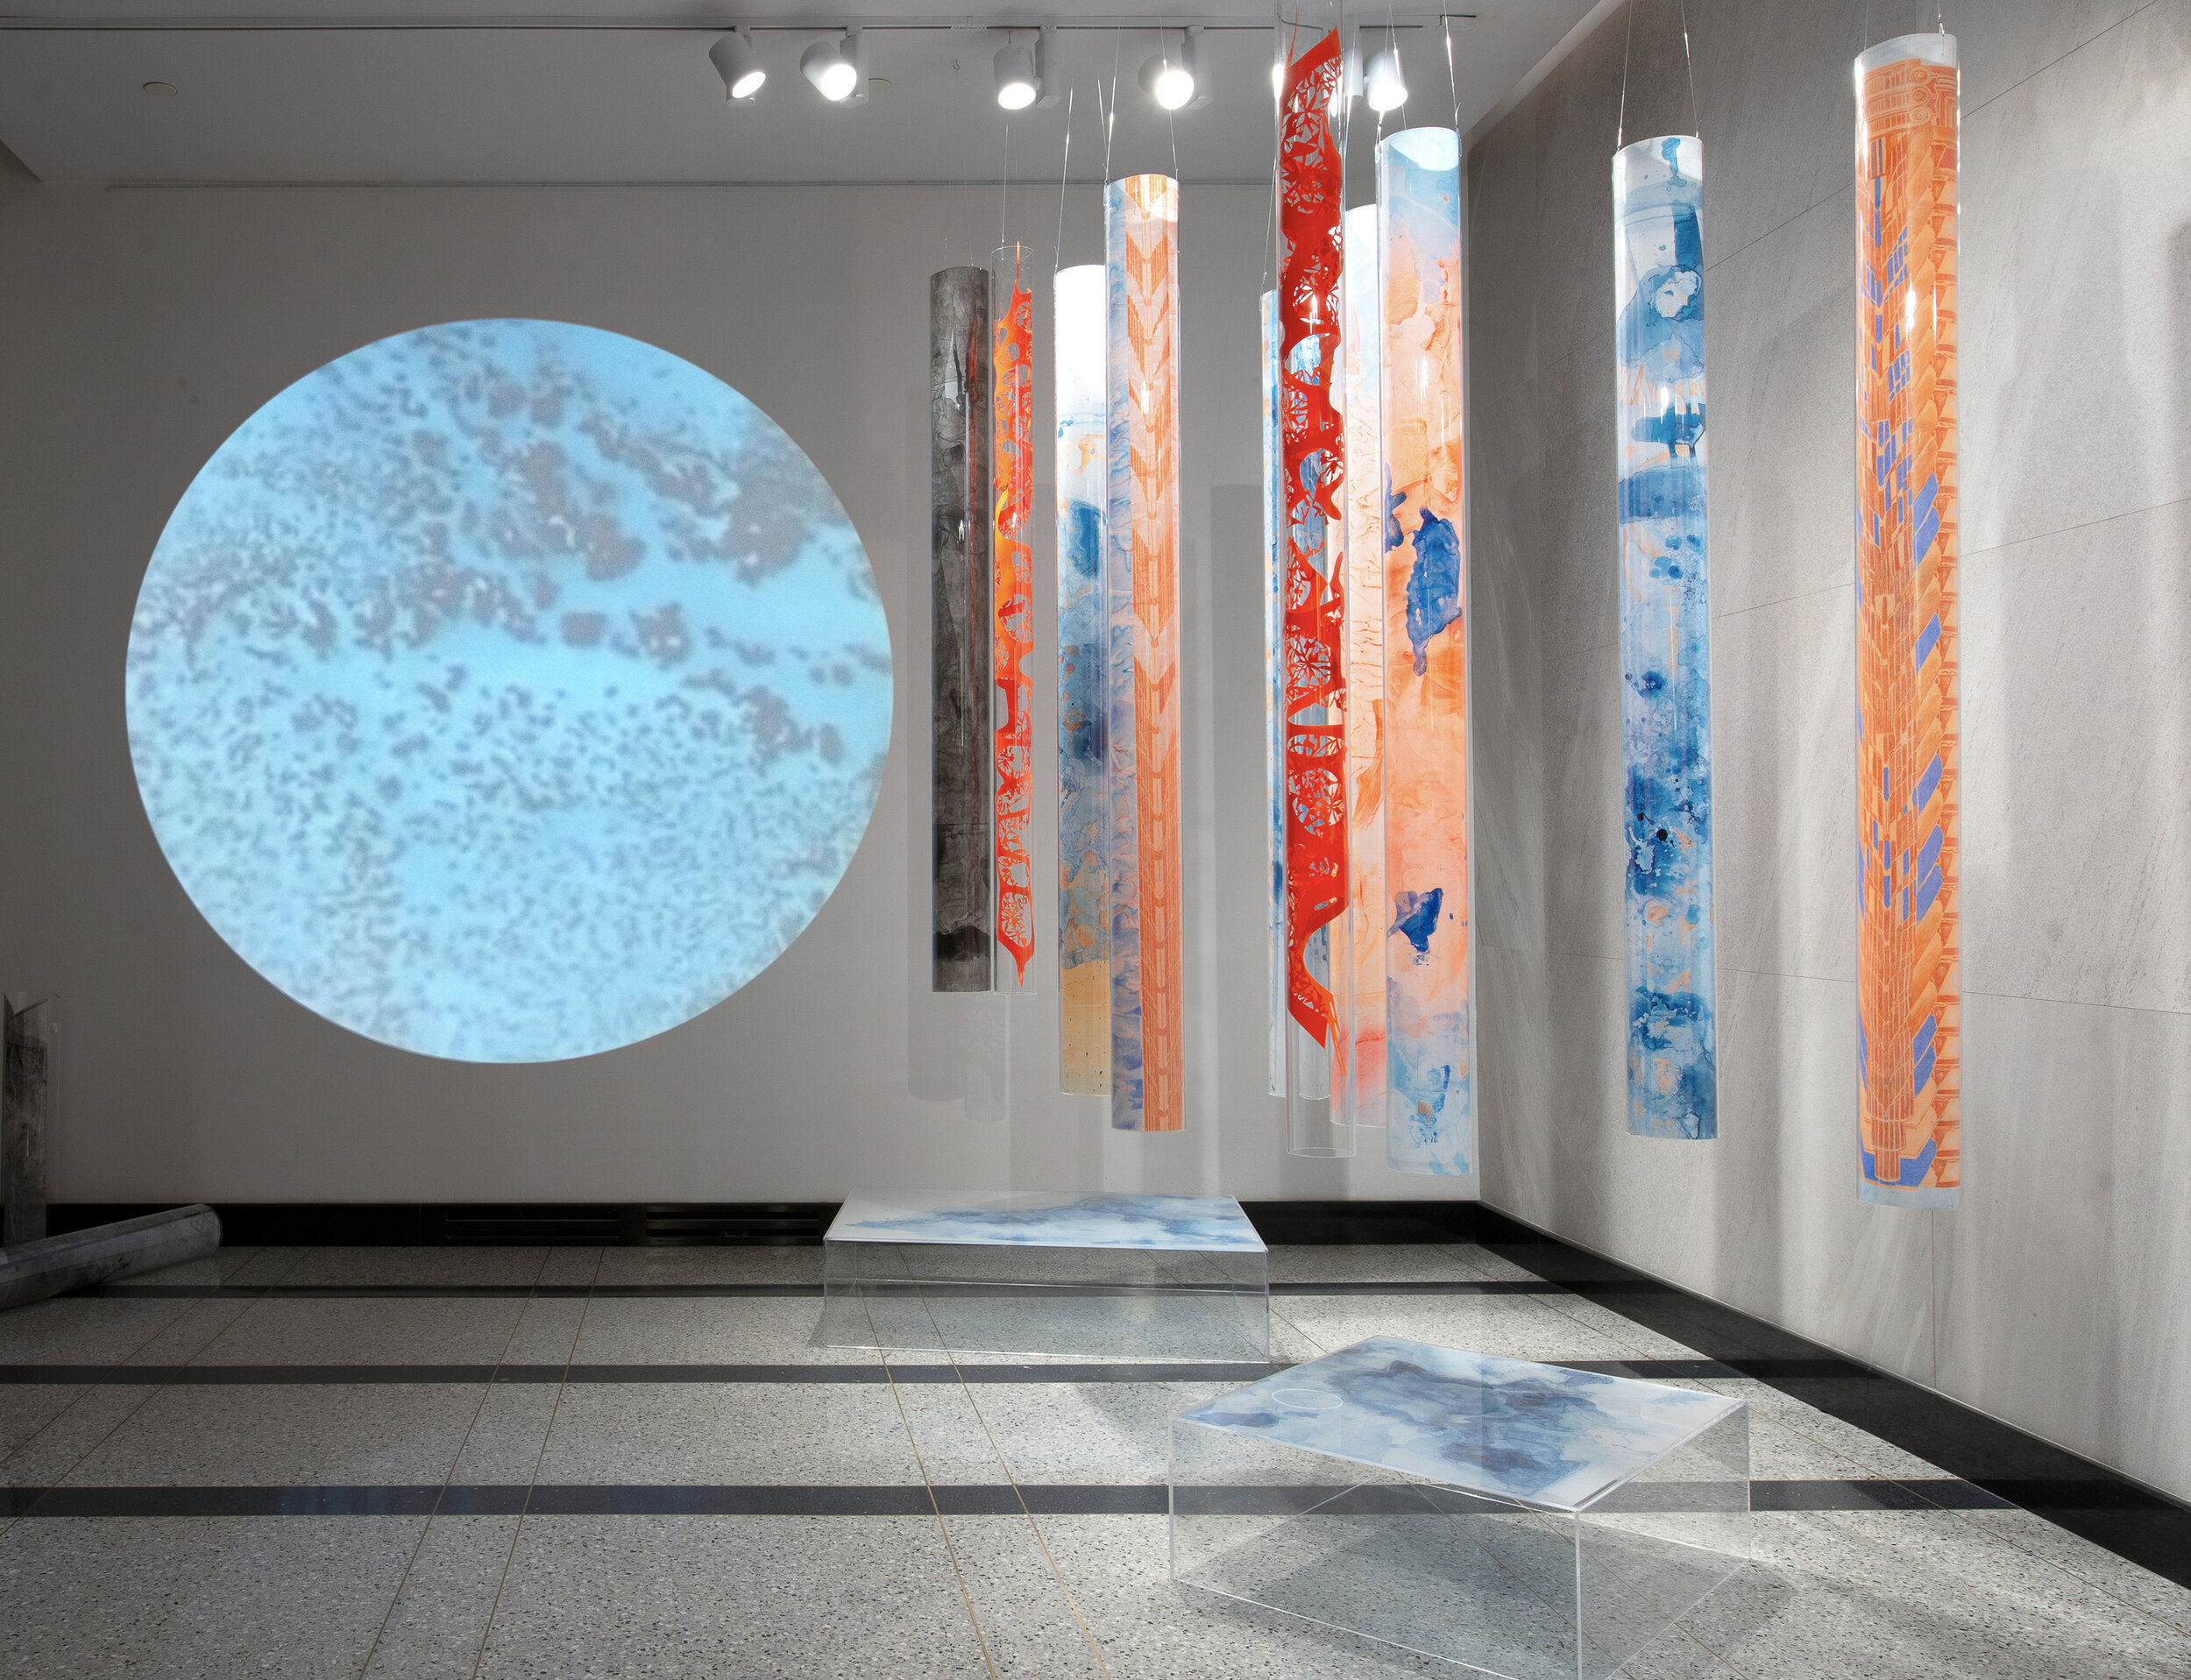  Installation view (detail), 2021, Plexiglas, ink on Mylar, video projection, variable dimensions.  Photo credit: Kat Ryals  